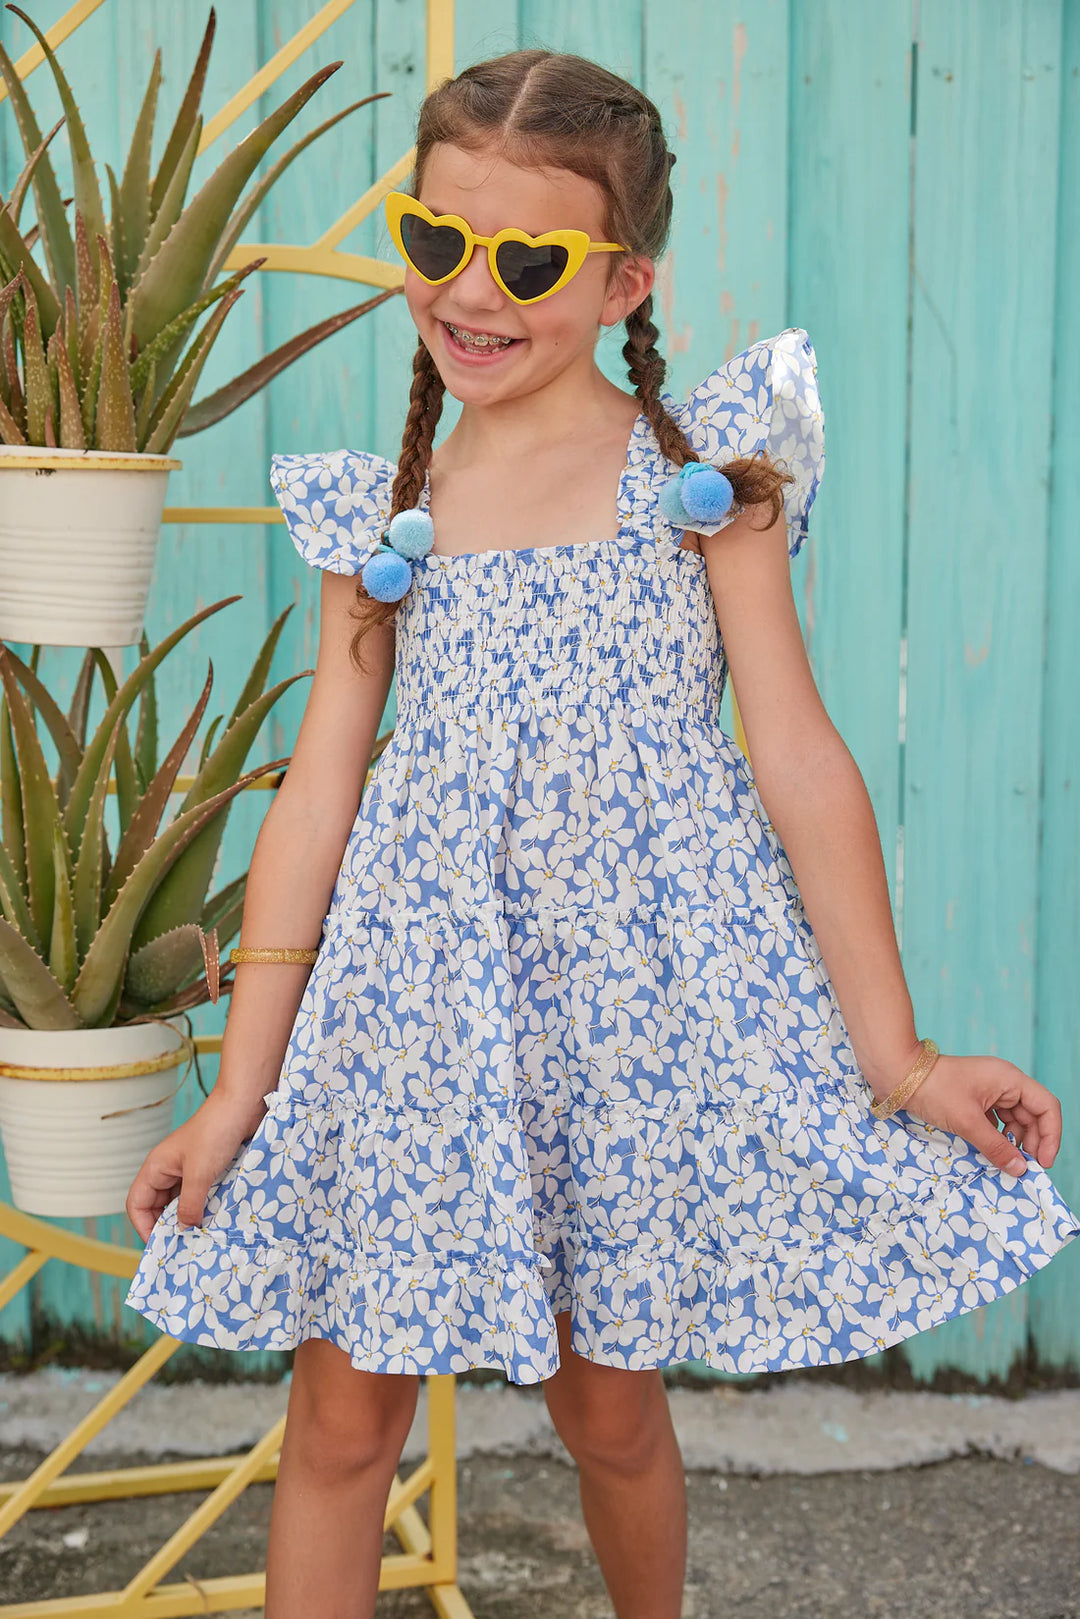 Bisby Twirl Dress in Piccadilly Blue